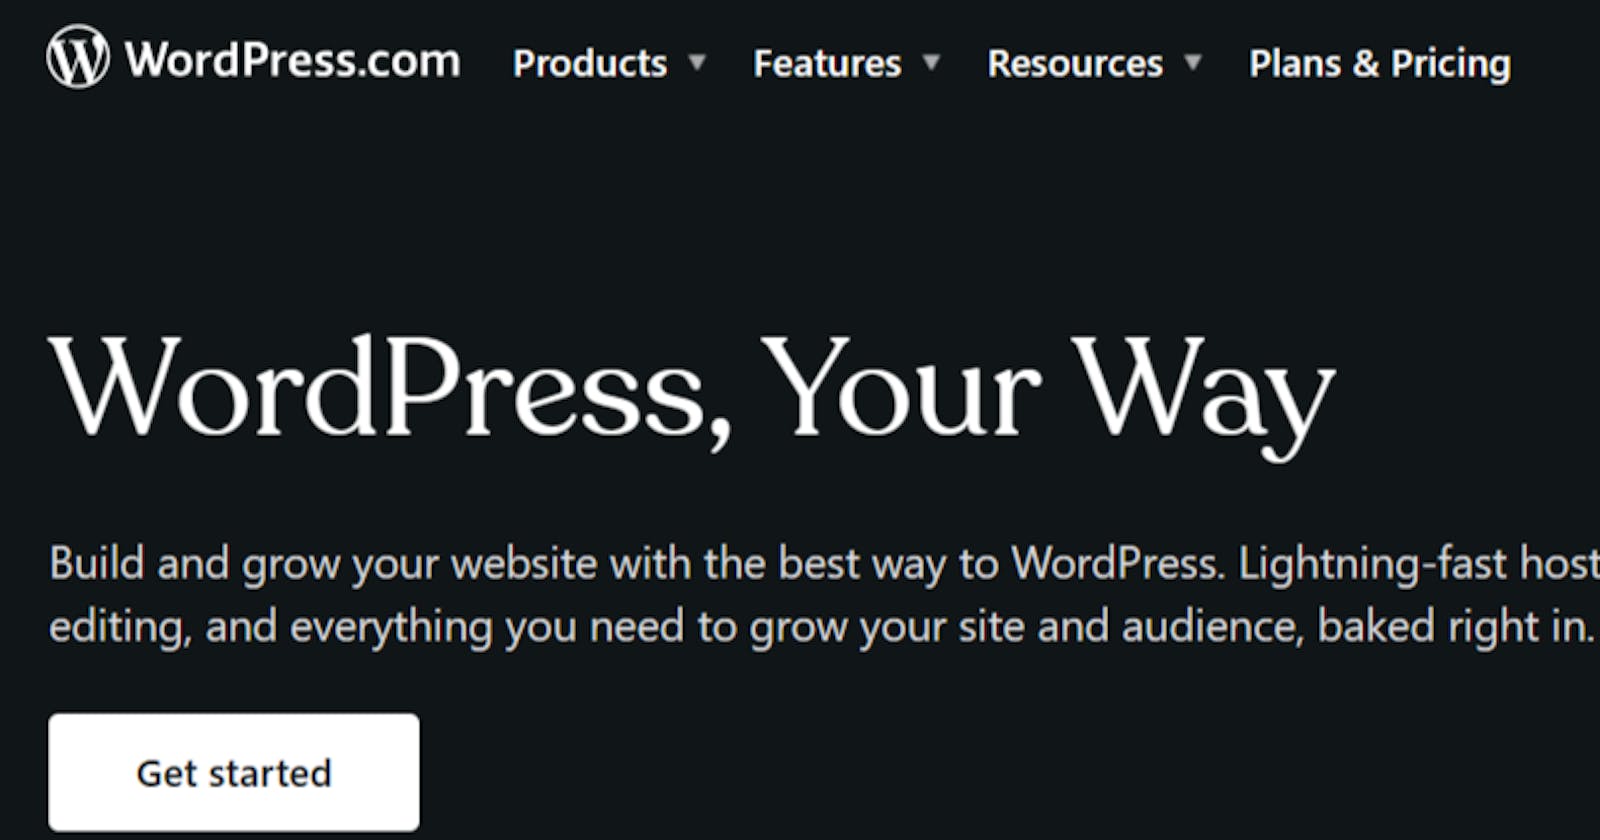 How to Build a Simple Website with WordPress